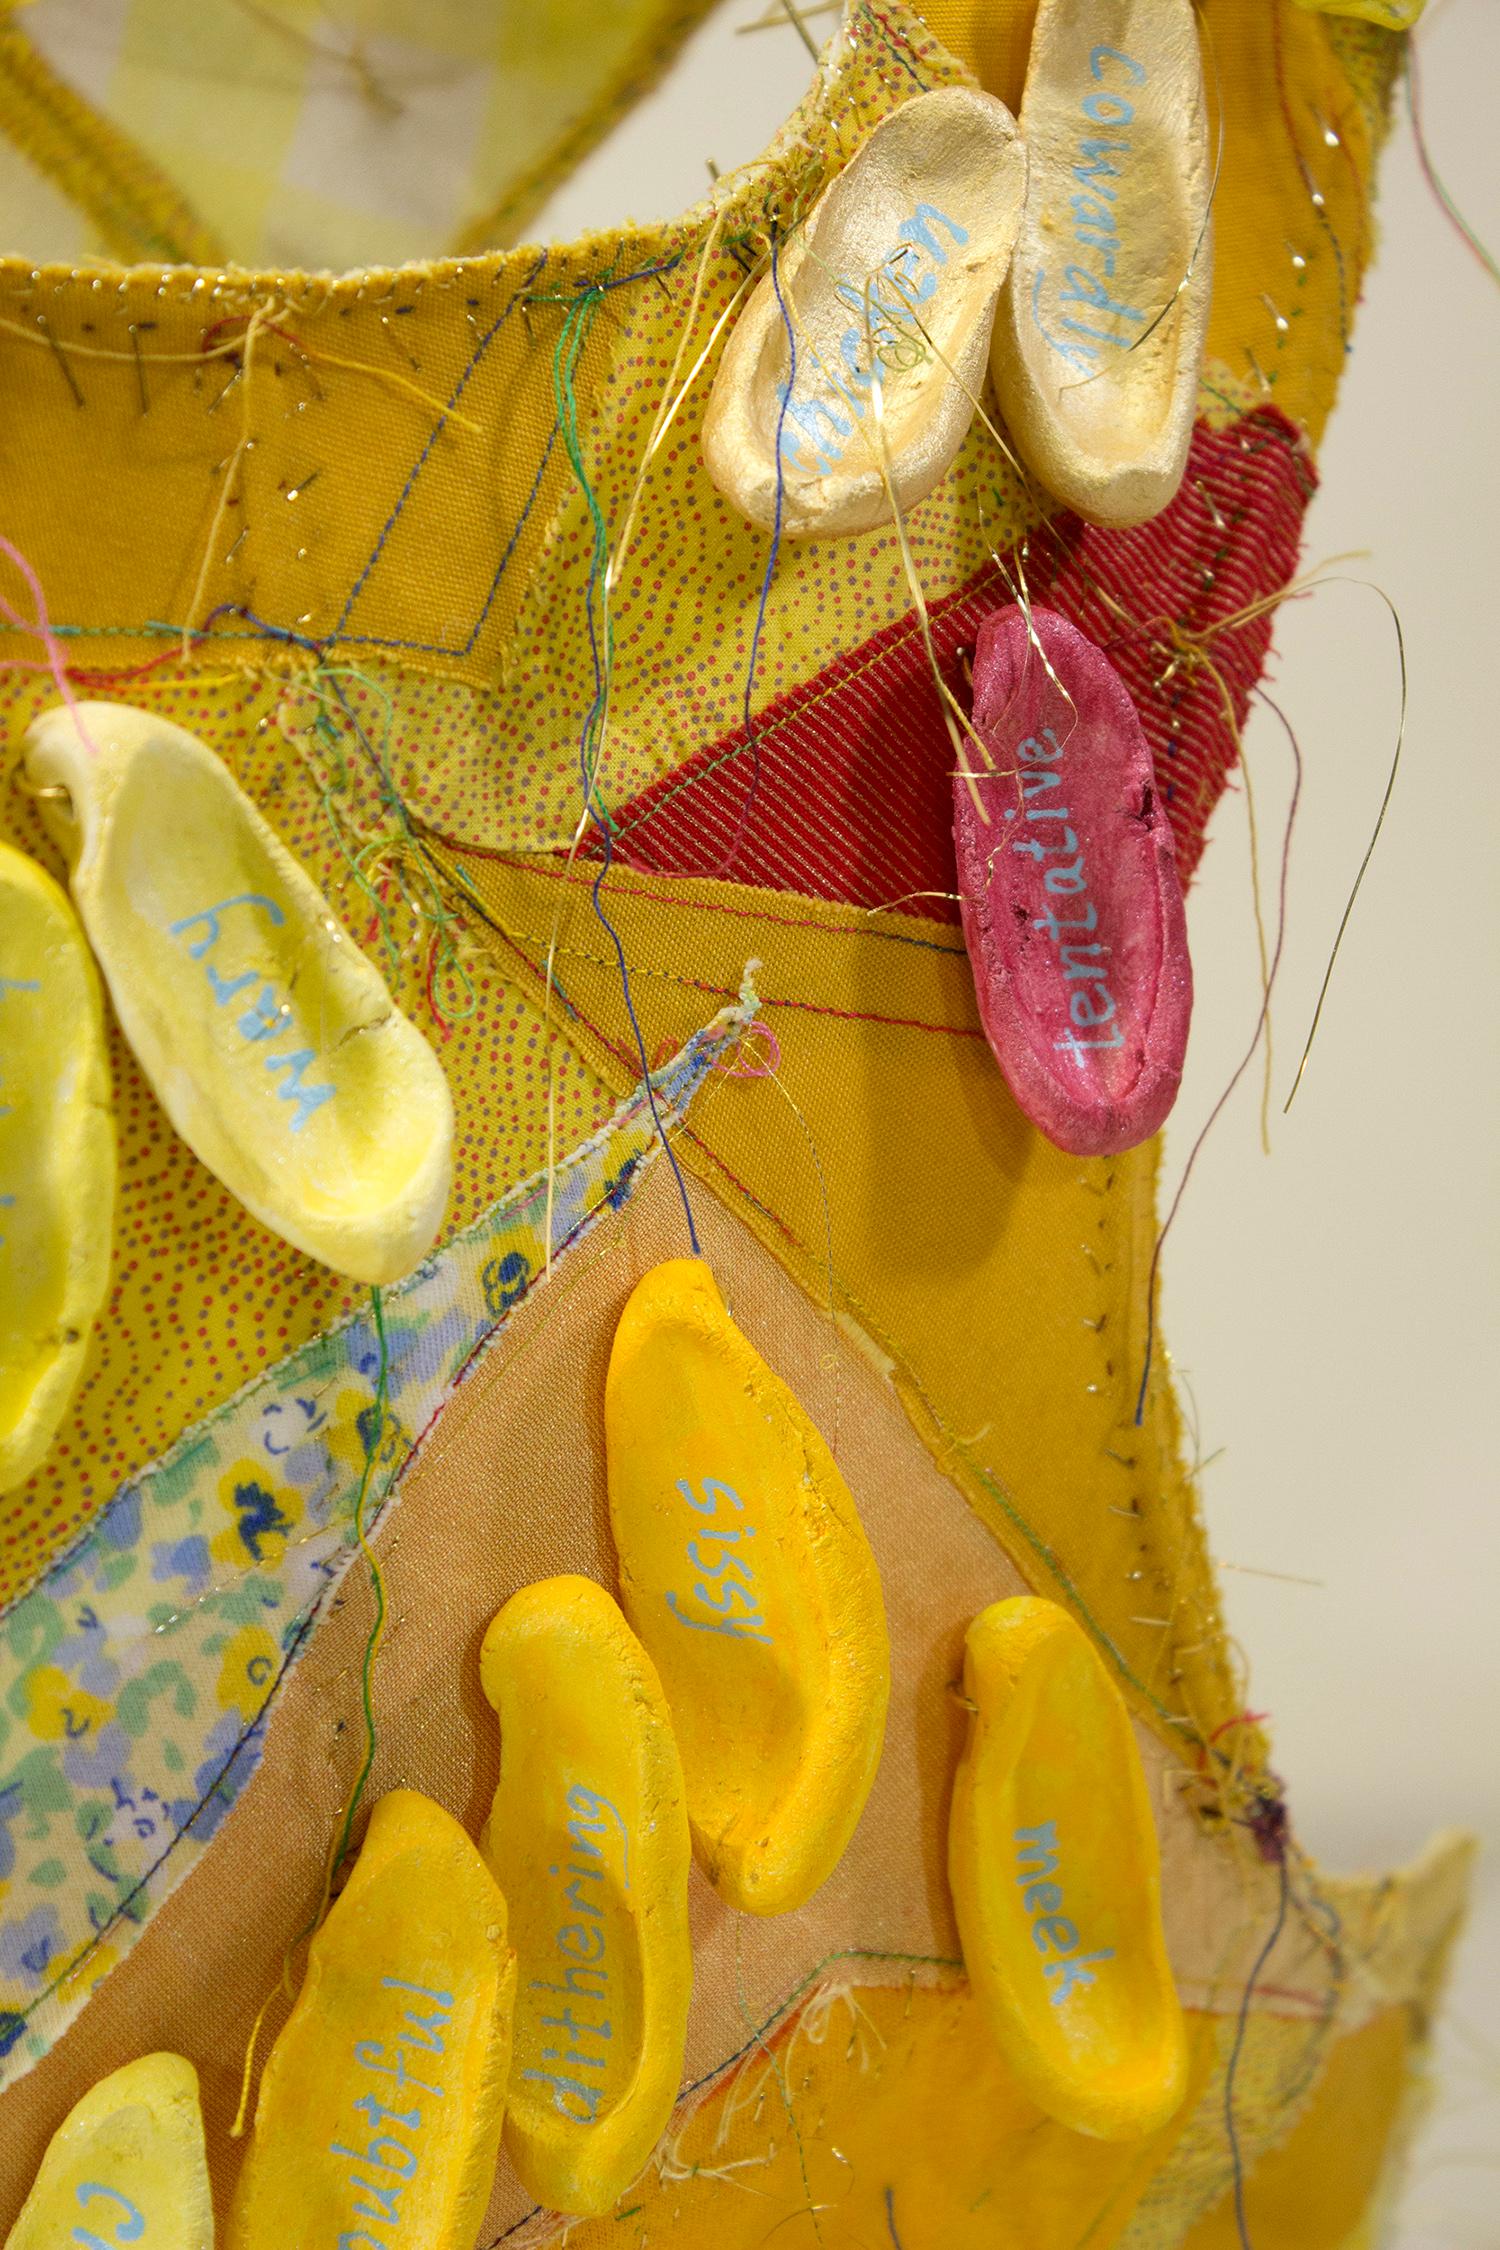 Virginia Mahoney’s “Yellow” is a mixed-media sculpture in vest form that is yellow with red accents, and has attached ceramic tags on which words referring to fear are handwritten. Brass spikes projecting inside emphasize the discomfort one feels